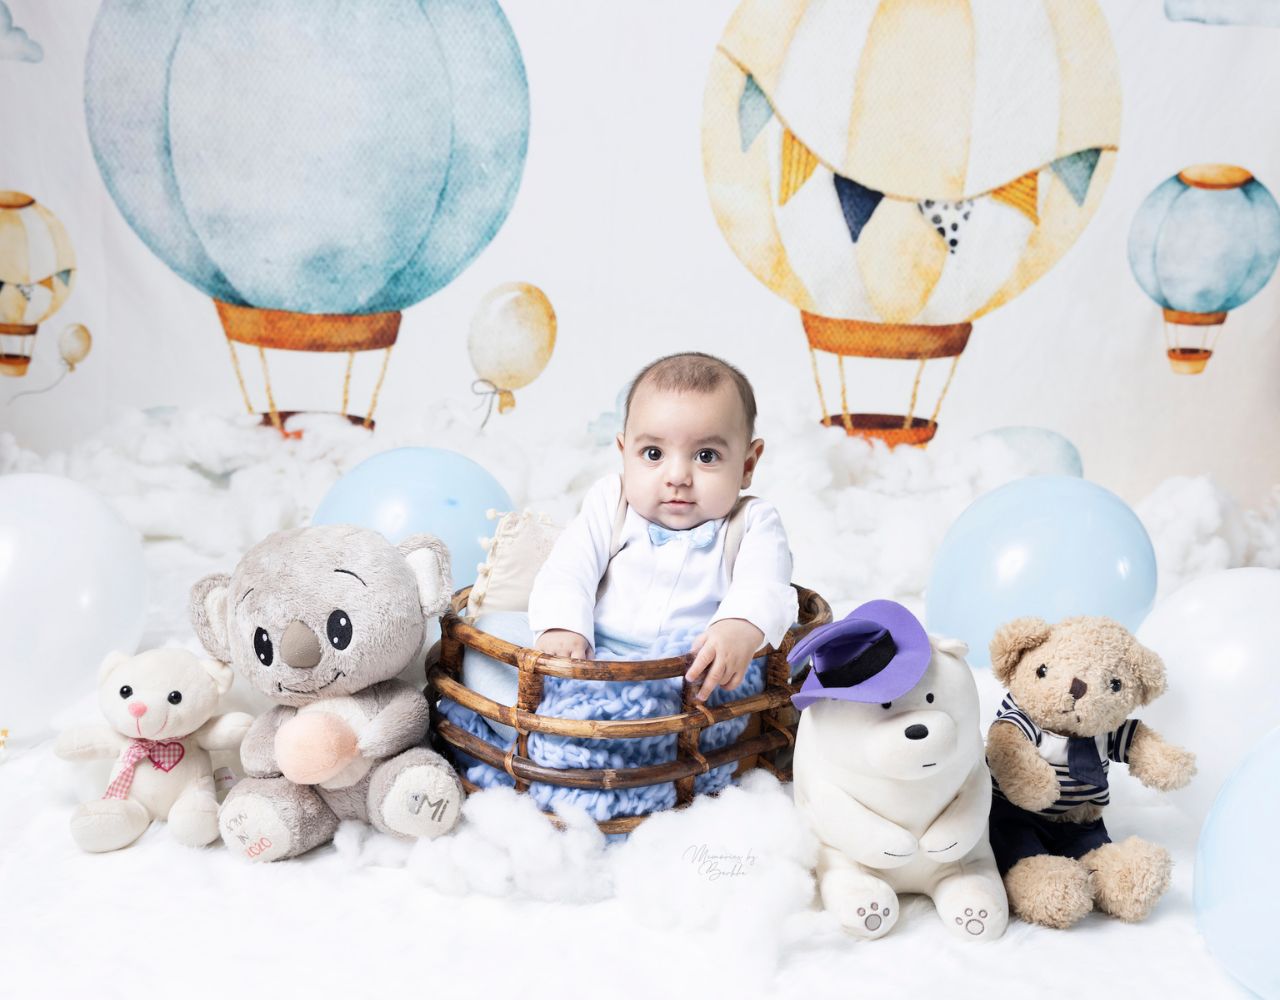 DIY Backdrops and Settings Crafting Personalized Scenes for Your Baby's Shoot